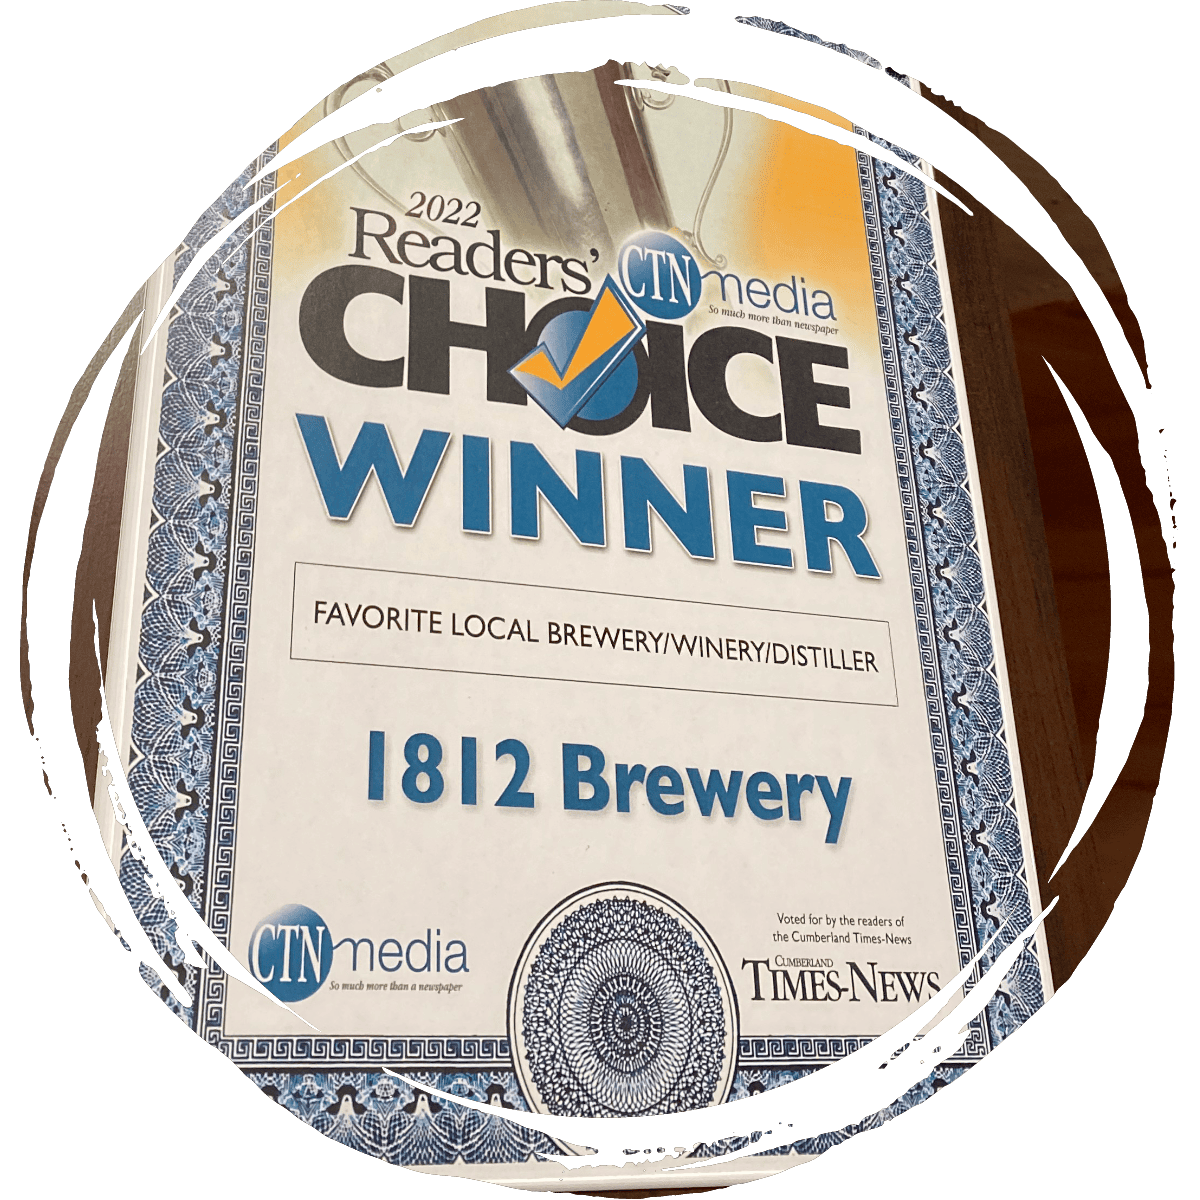 1812 is the Choice Winner for Favorite Local Brewery.